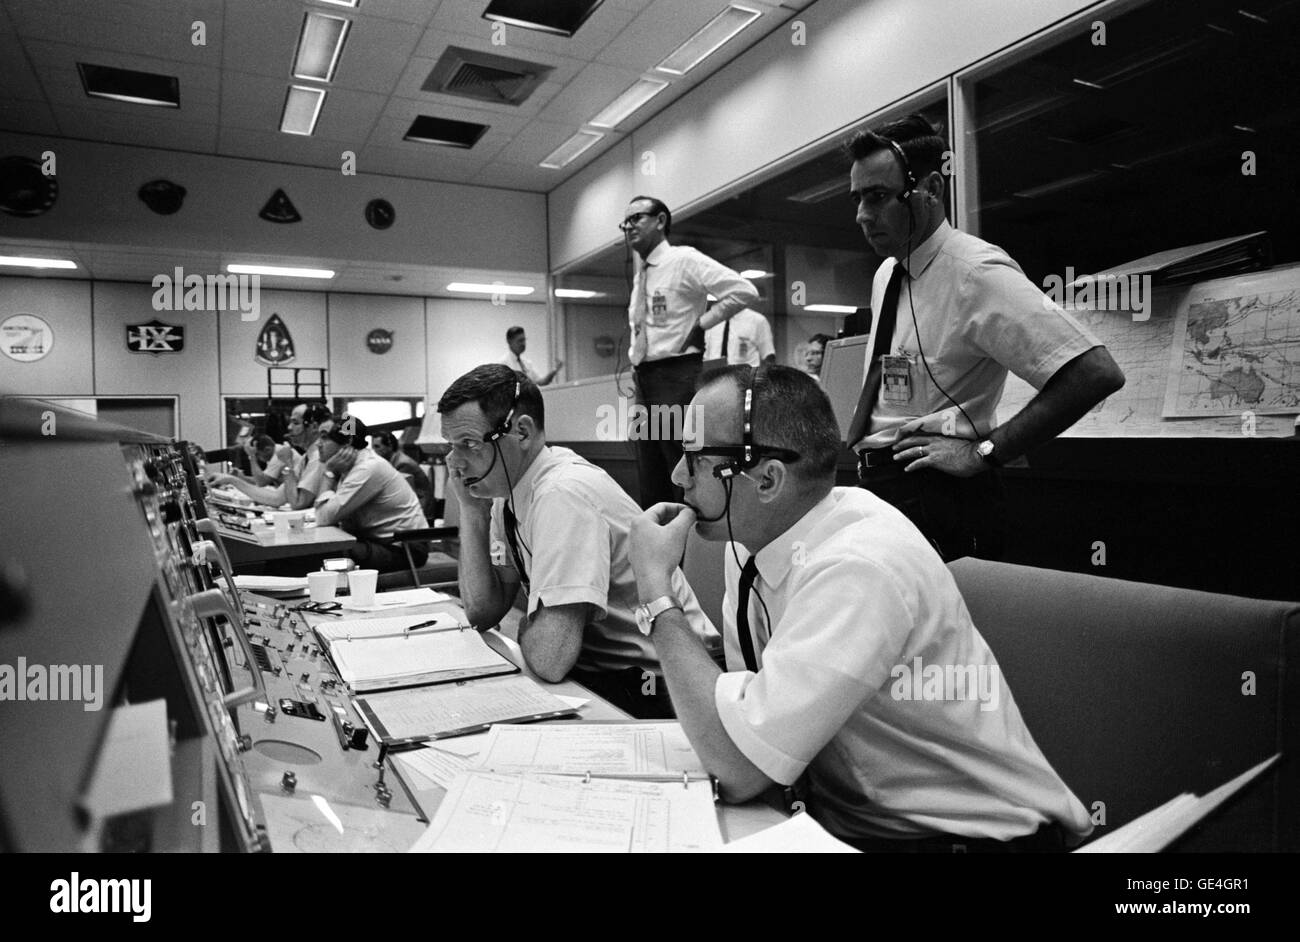 View of activity at the flight director's console in the Mission Operations Control Room in the Mission Control Center, Building 30, on the first day of the Apollo 10 lunar orbit mission. Seated are Gerald D. Griffin (foreground) and Glynn S. Lunney, Shift 1 (Black Team) flight directors. Milton L. Windler, standing behind them, is the flight director of Shift 2 (Maroon Team). In the center background, standing, is Dr. Christopher C. Kraft Jr., MSC Director of Flight Operations.   Photo Number: S69-34038 Date: May 18, 1969 Stock Photo